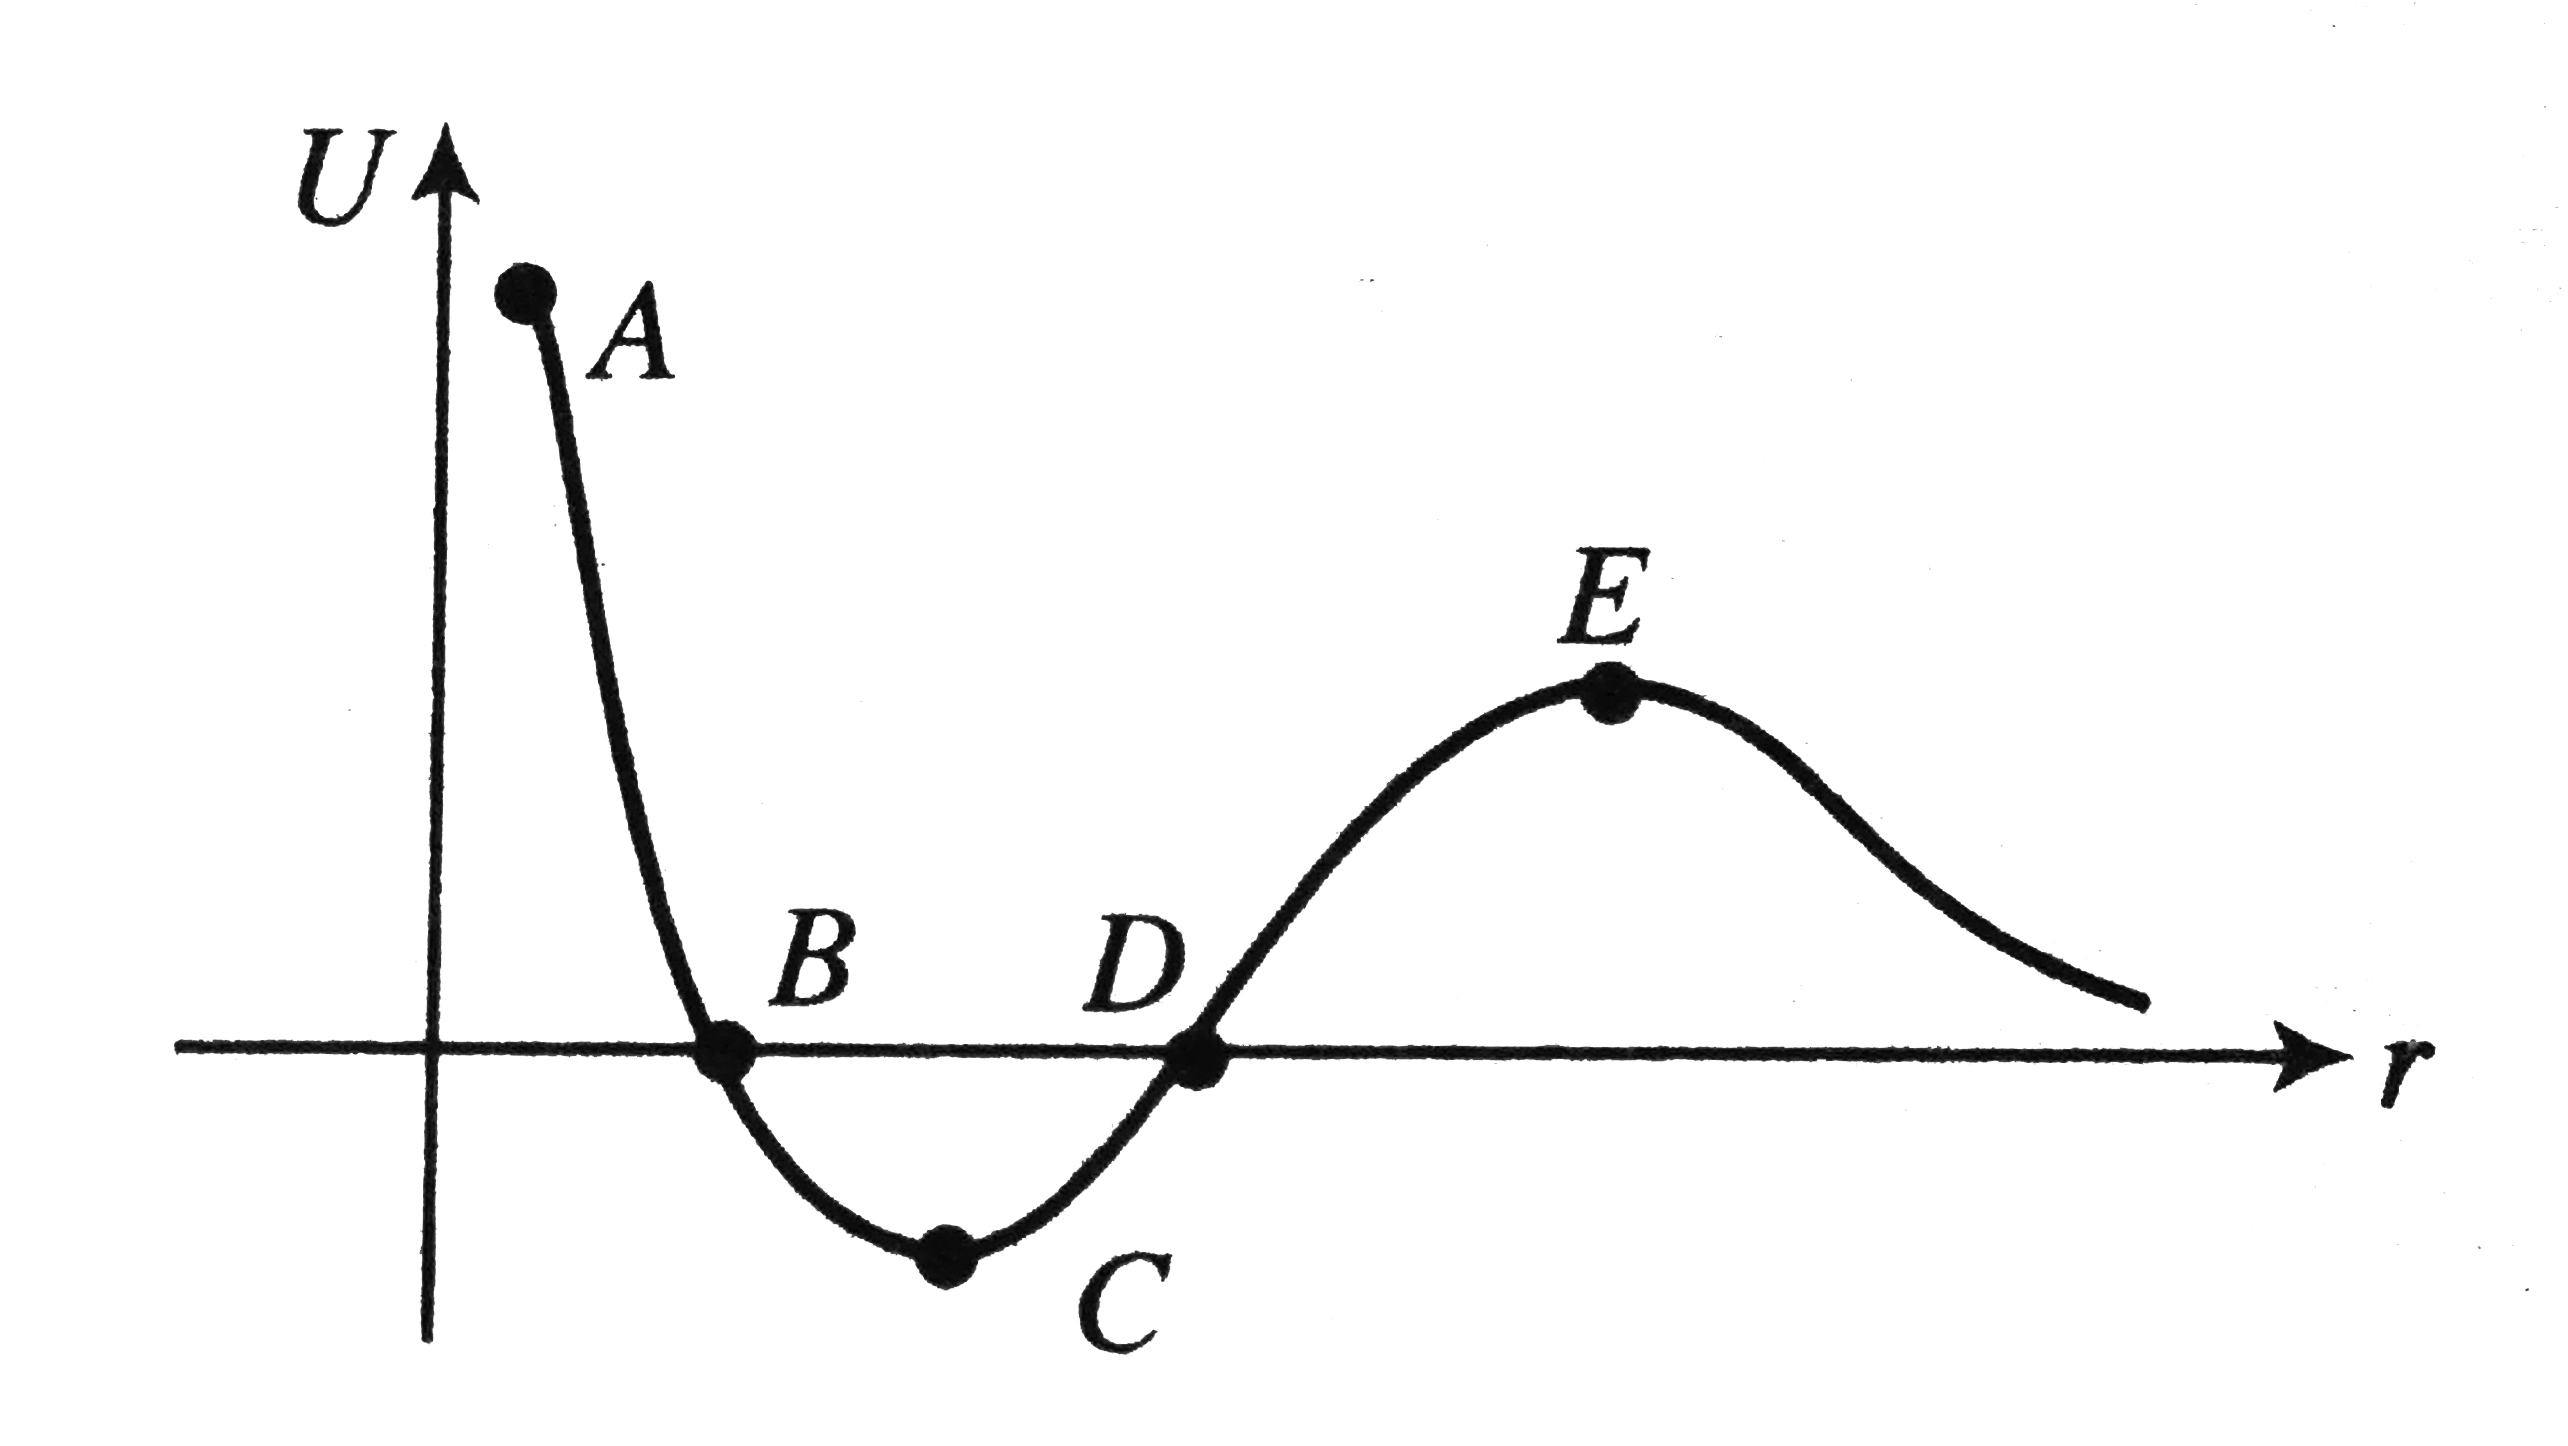 The given plot shows the variation of U, the potential energy of interation between two particles, with the distance separating them, r.   1. B and D are equilibrium points.   2. C is point of stable equilibrium.   3. The force of interaction between the two particles is attractive between points C and B, and repulsive between pionts D and E on the curve.   4. The force of interaction between the particle is repulsive between points C and A.   Which of the above statements are correct?